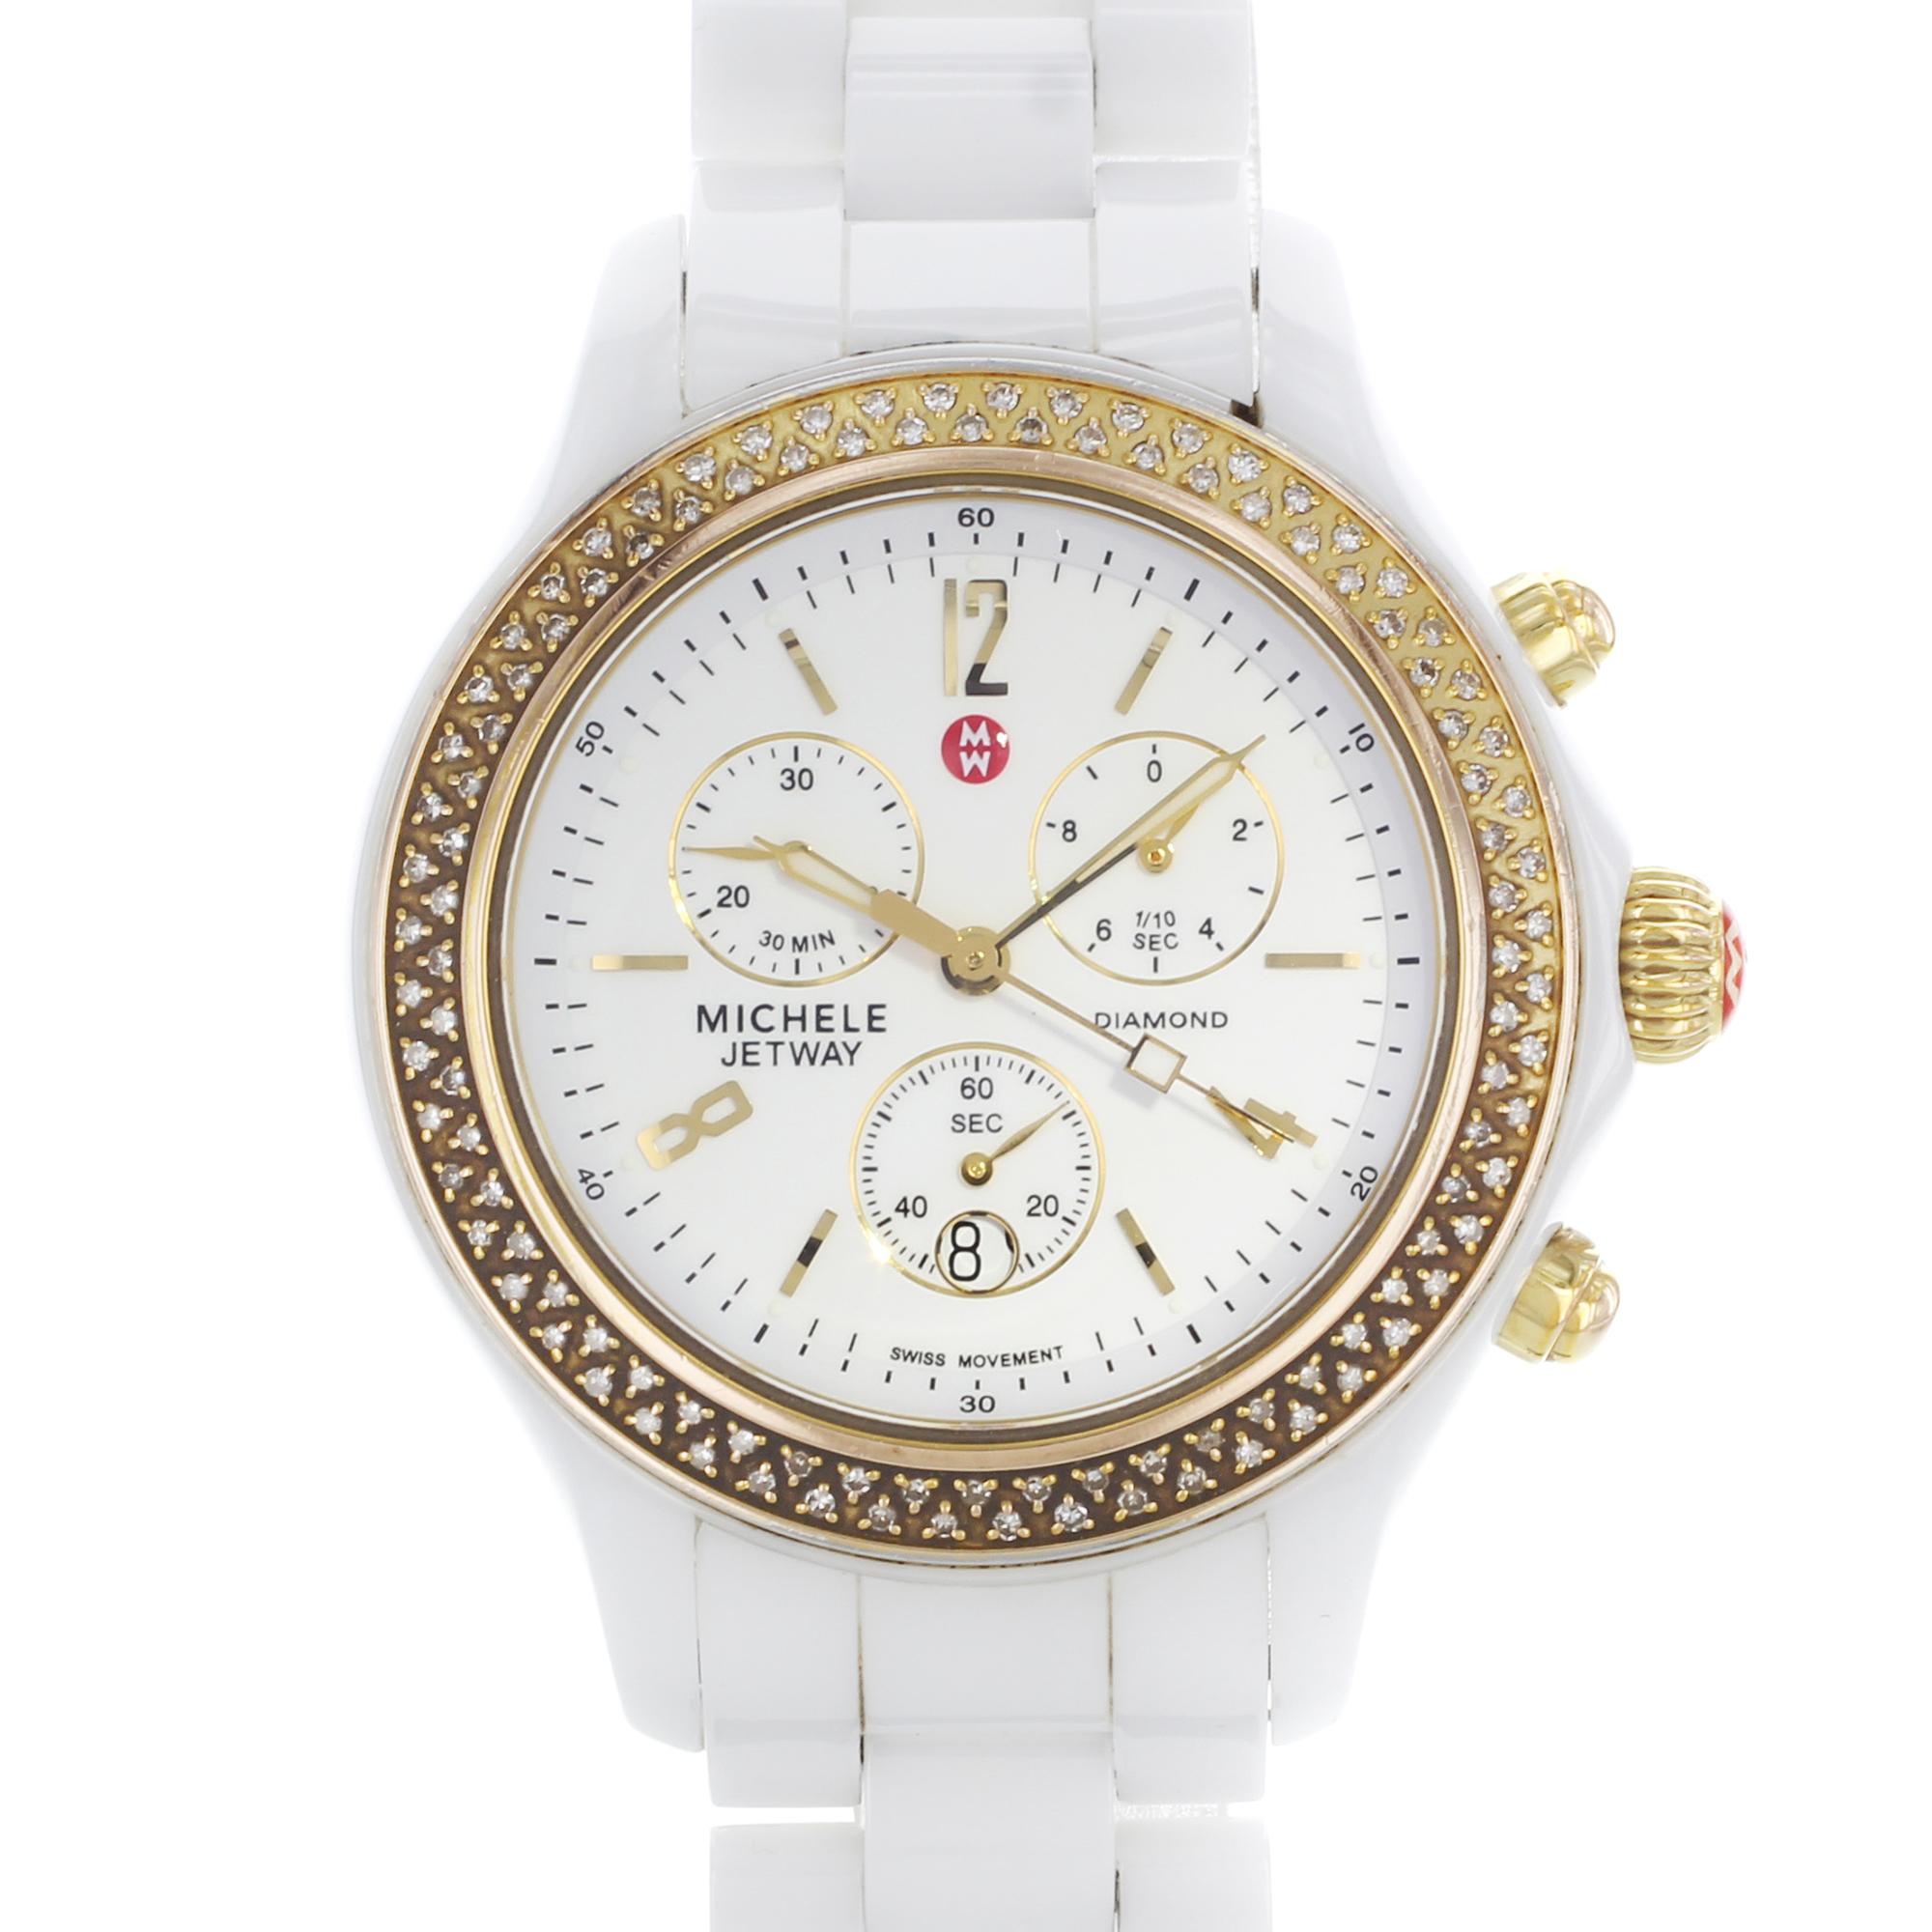 This pre-owned Michele Jetway MWW17B000008  is a beautiful Ladies timepiece that is powered by a quartz movement which is cased in a ceramic case. It has a round shape face, chronograph, chronograph hand, date, diamonds, small seconds subdial dial